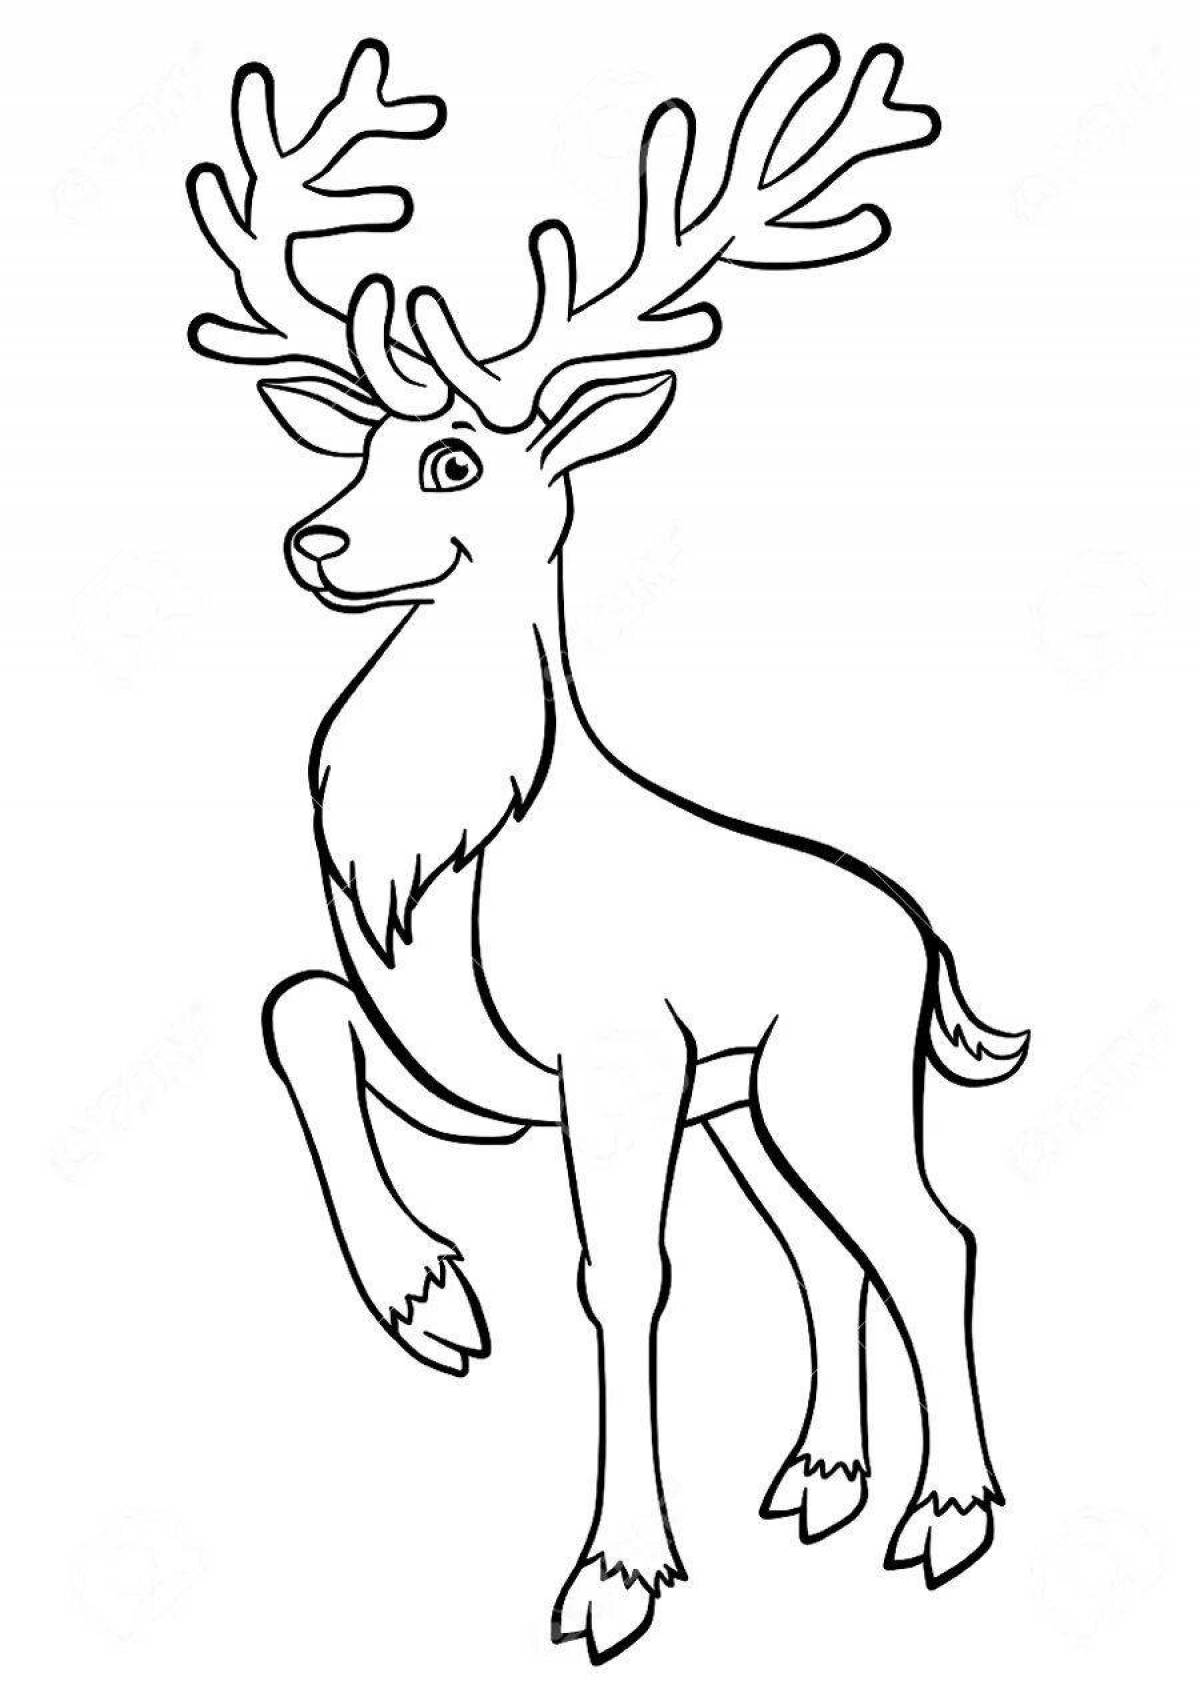 Adorable silver hoof coloring book for babies